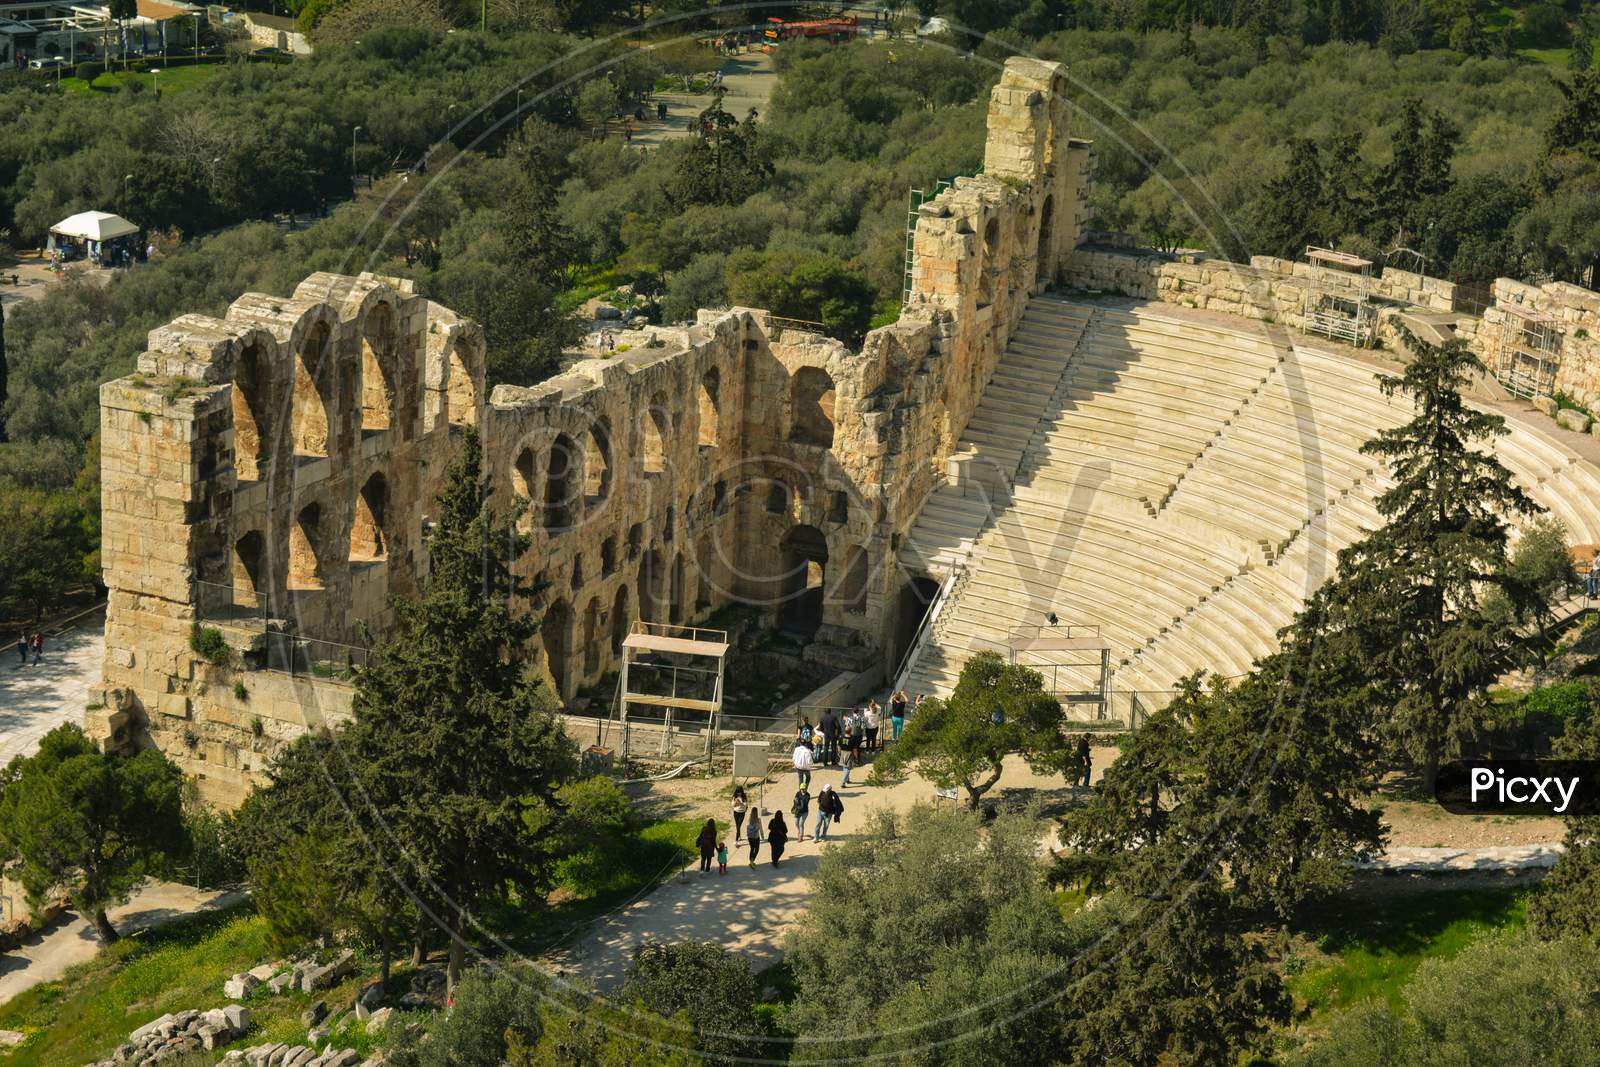 The ancient theater Odeon of Herodes Atticus